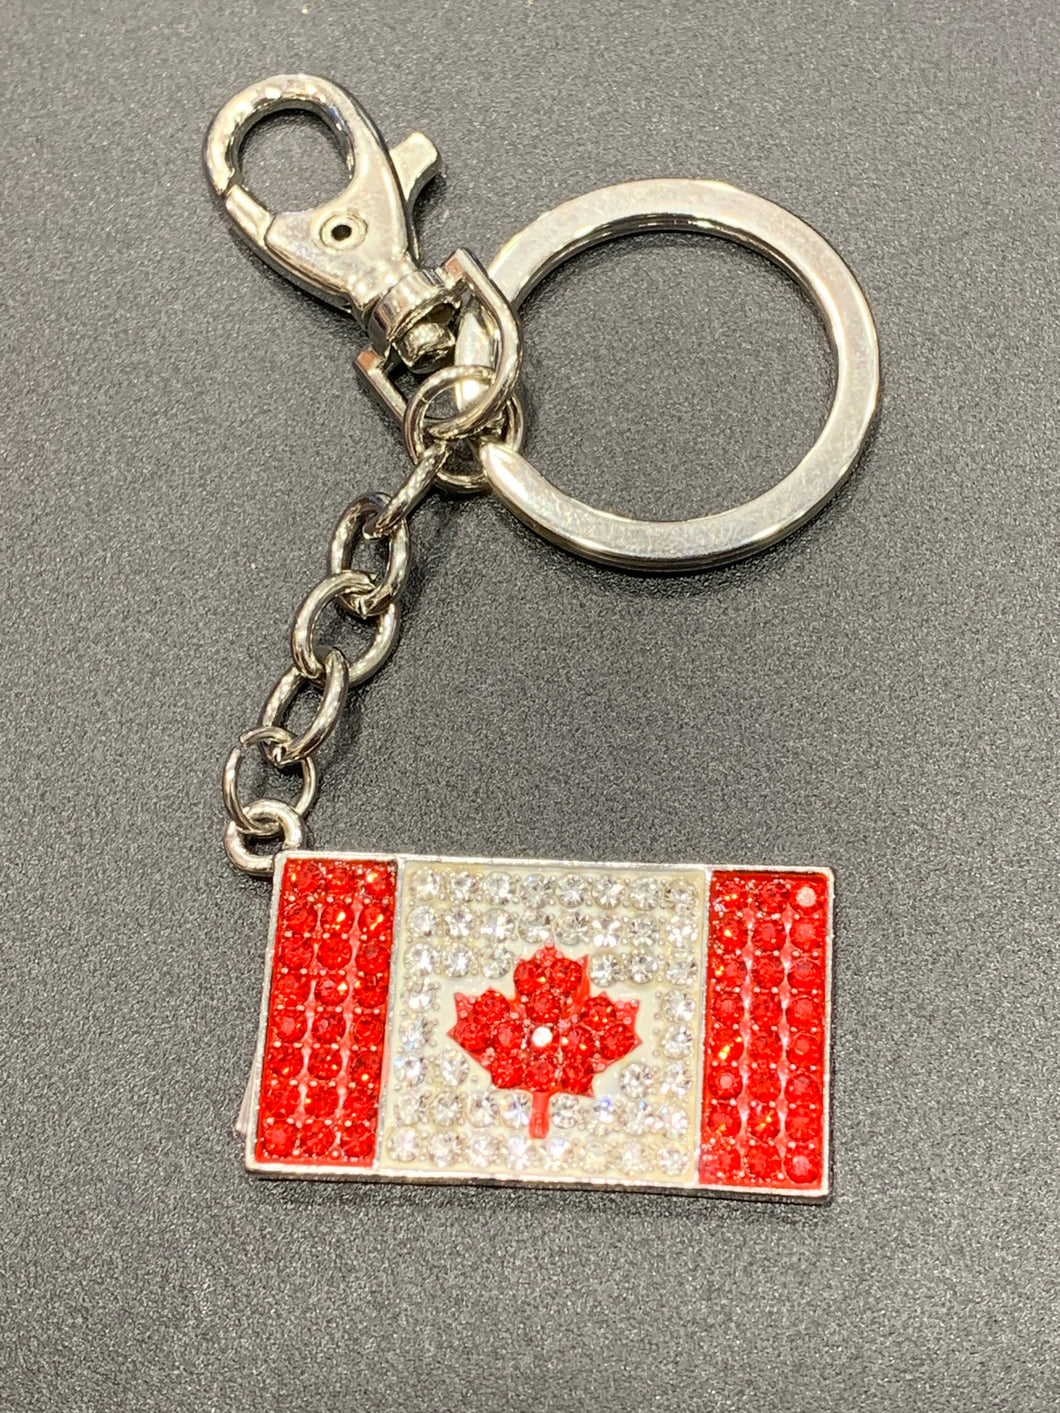 Canada flag bling key chain for tourist and souvenirs in Canada